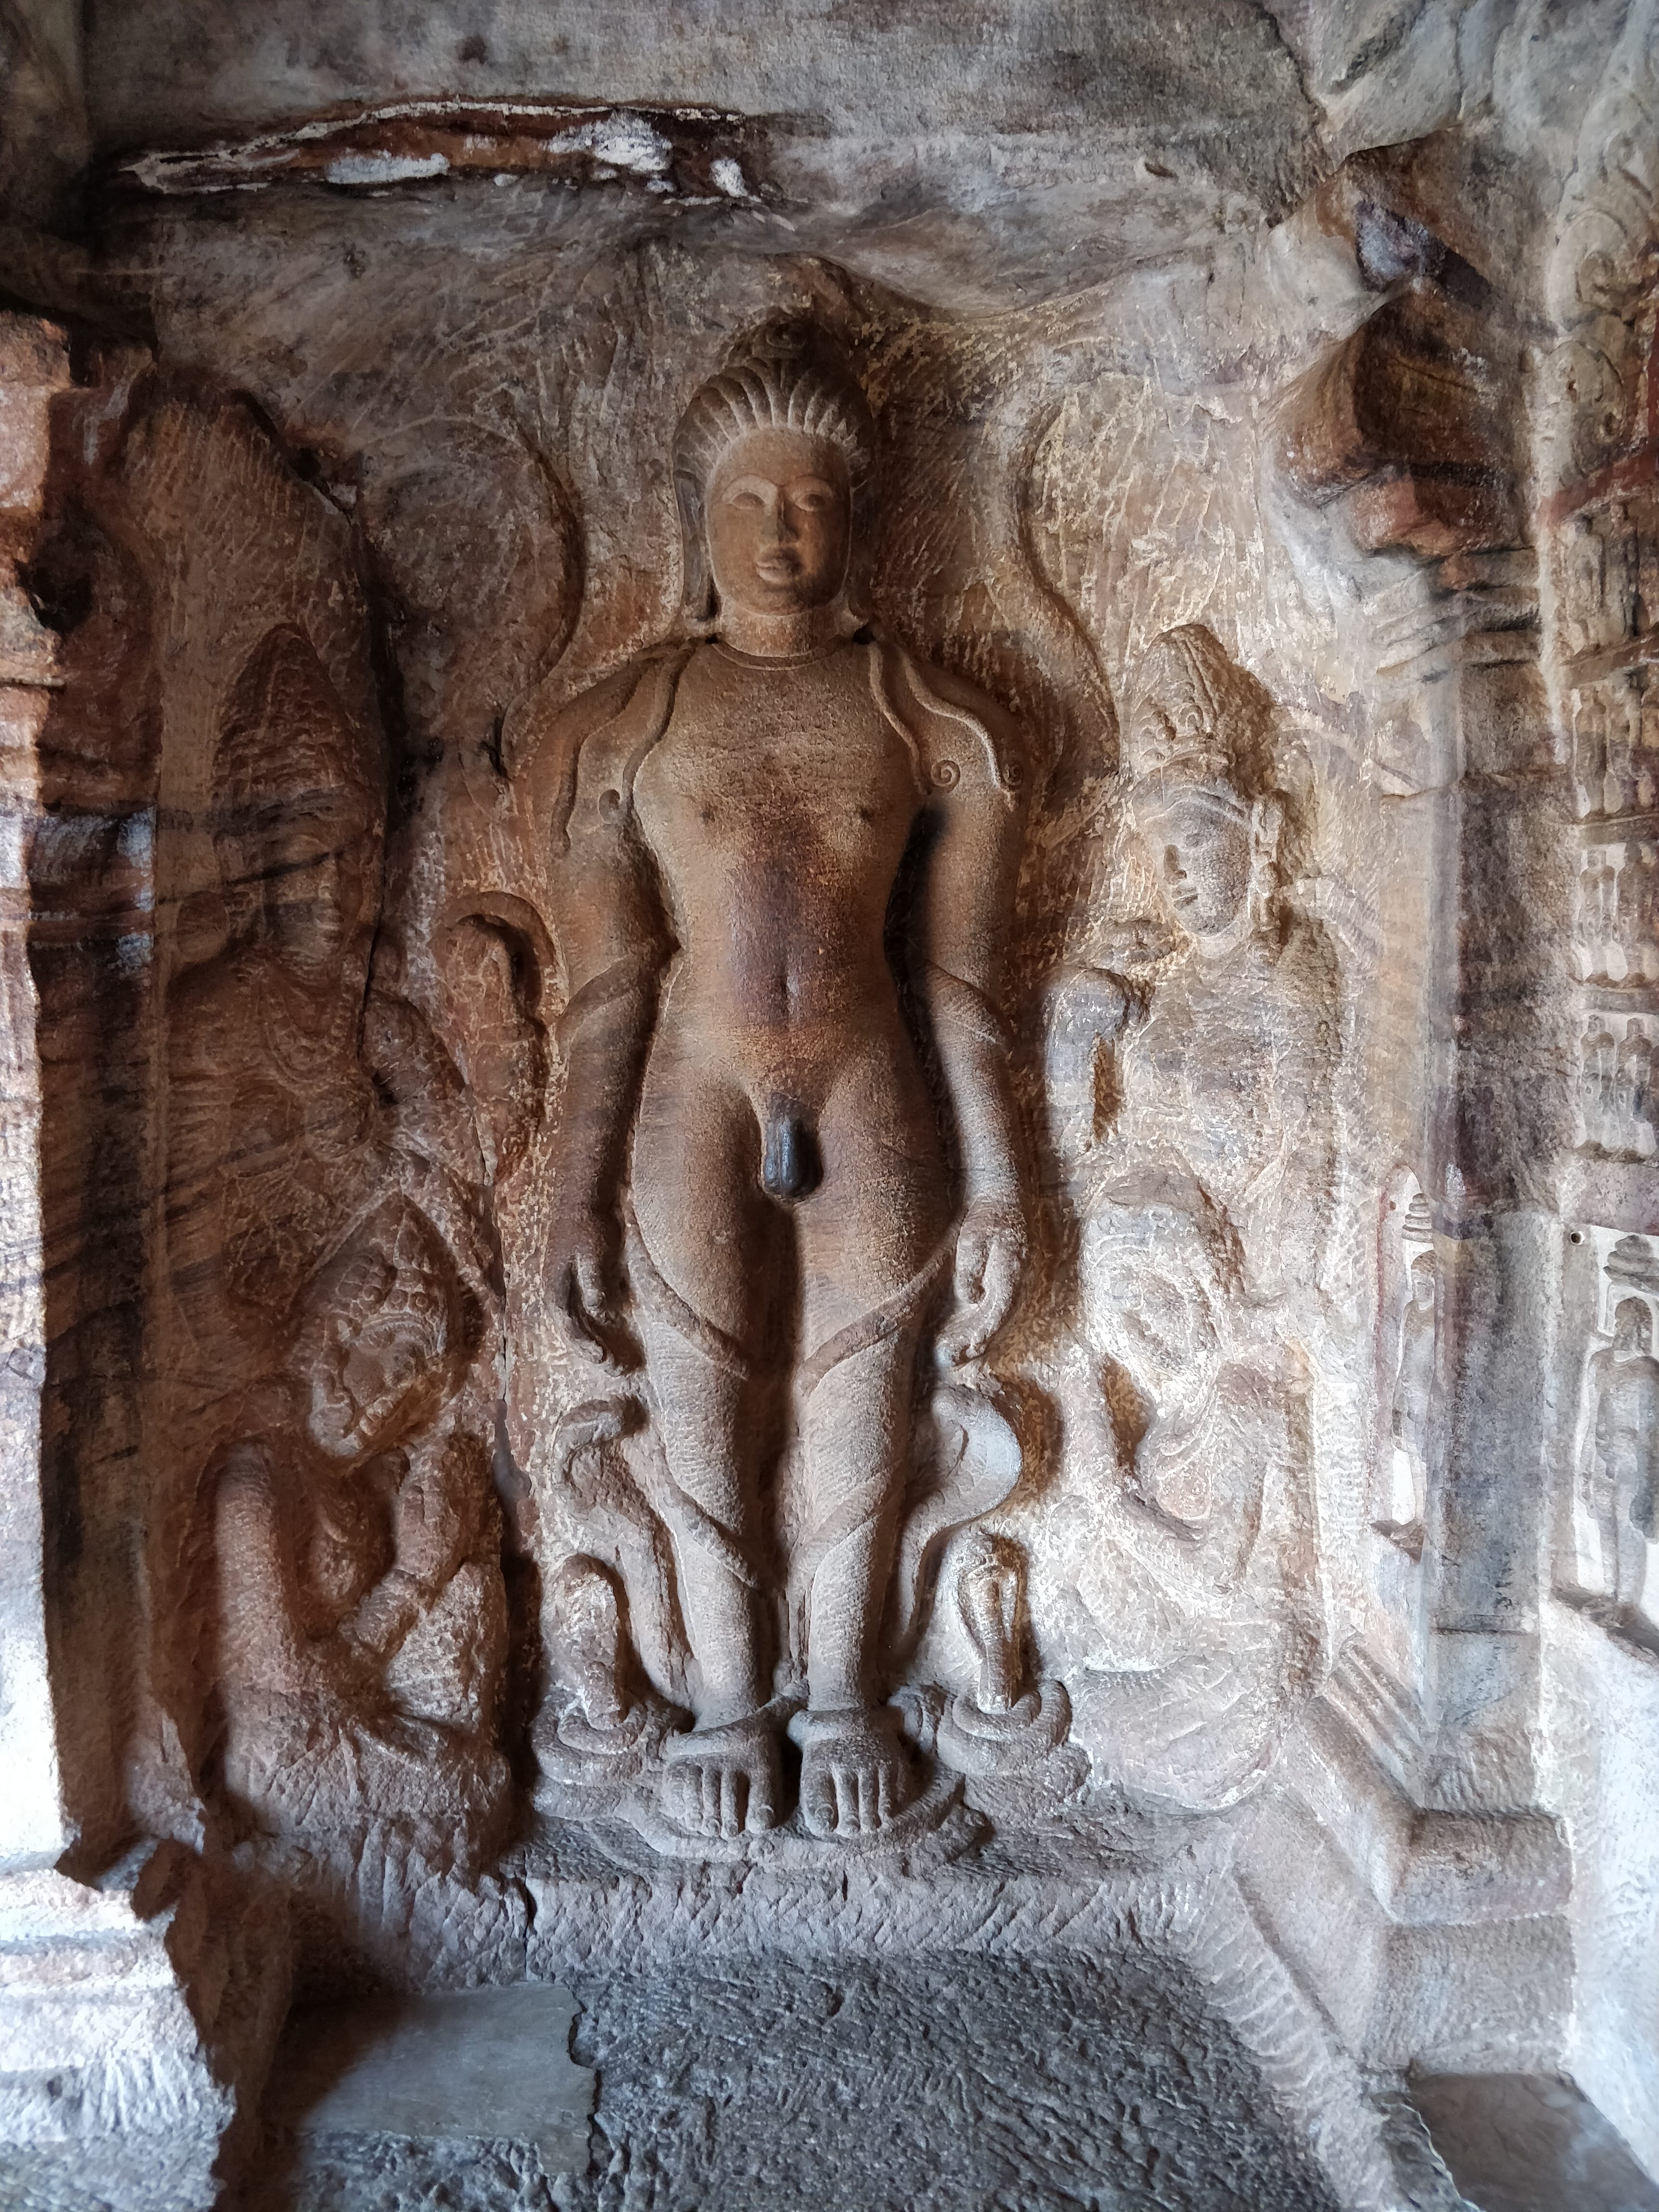 on one of the walls inside the cave temple